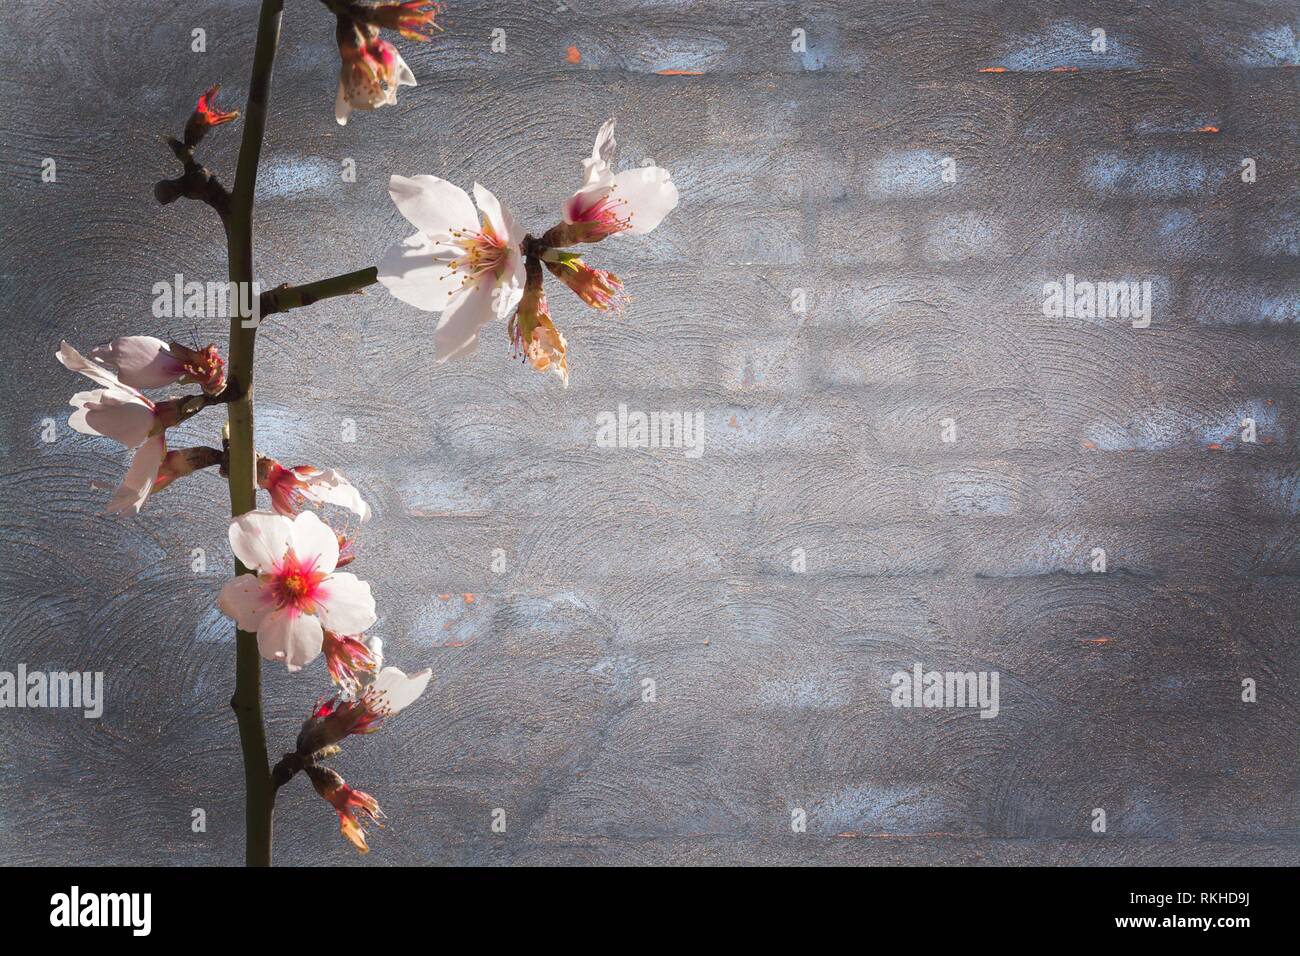 Almond spring flowers on grey washed brick wall background texture with torn, vintage grungy distressed surface. Stock Photo